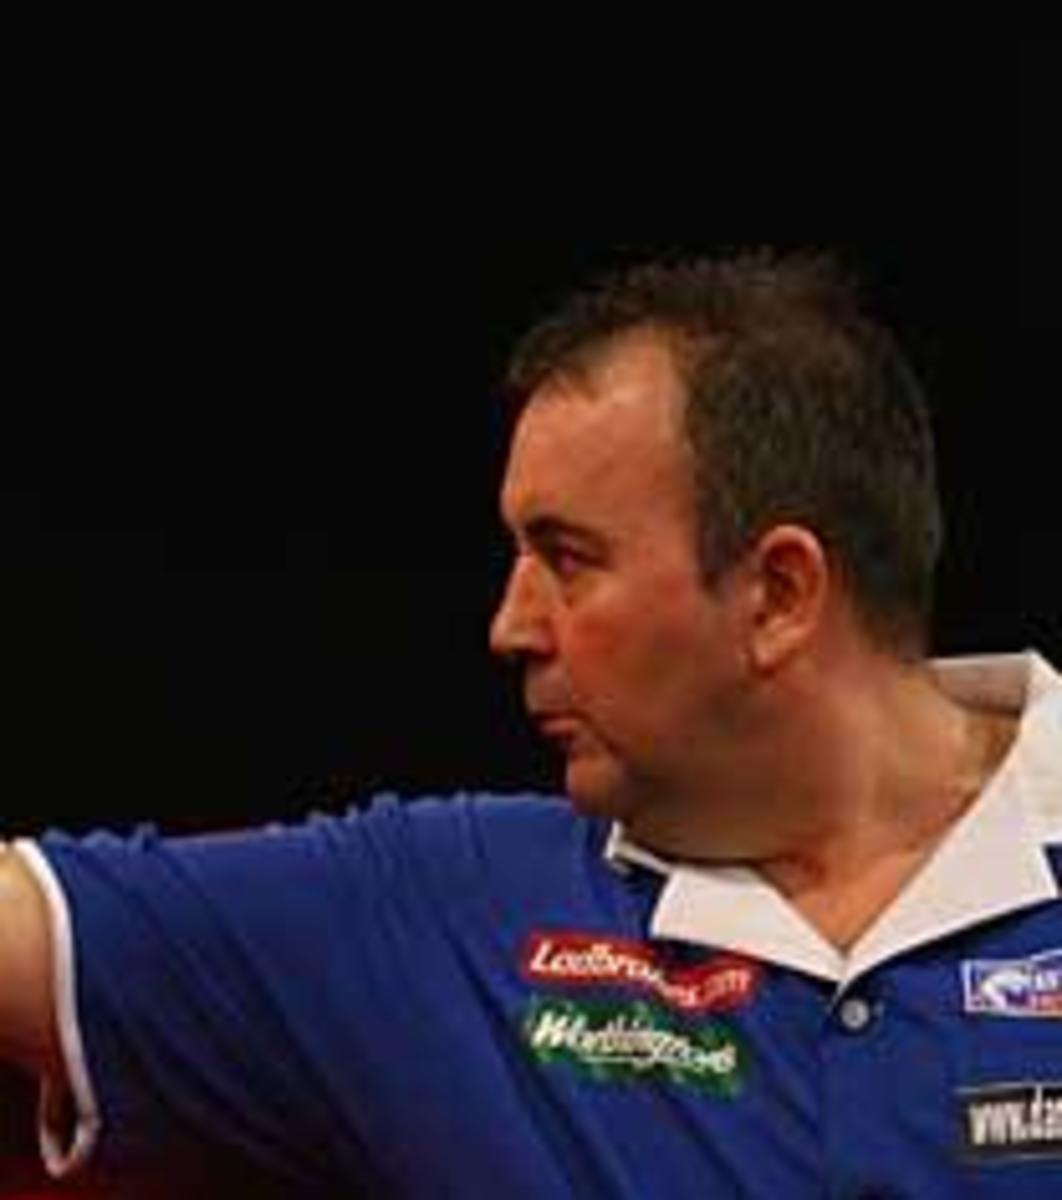 Phil Taylor in action